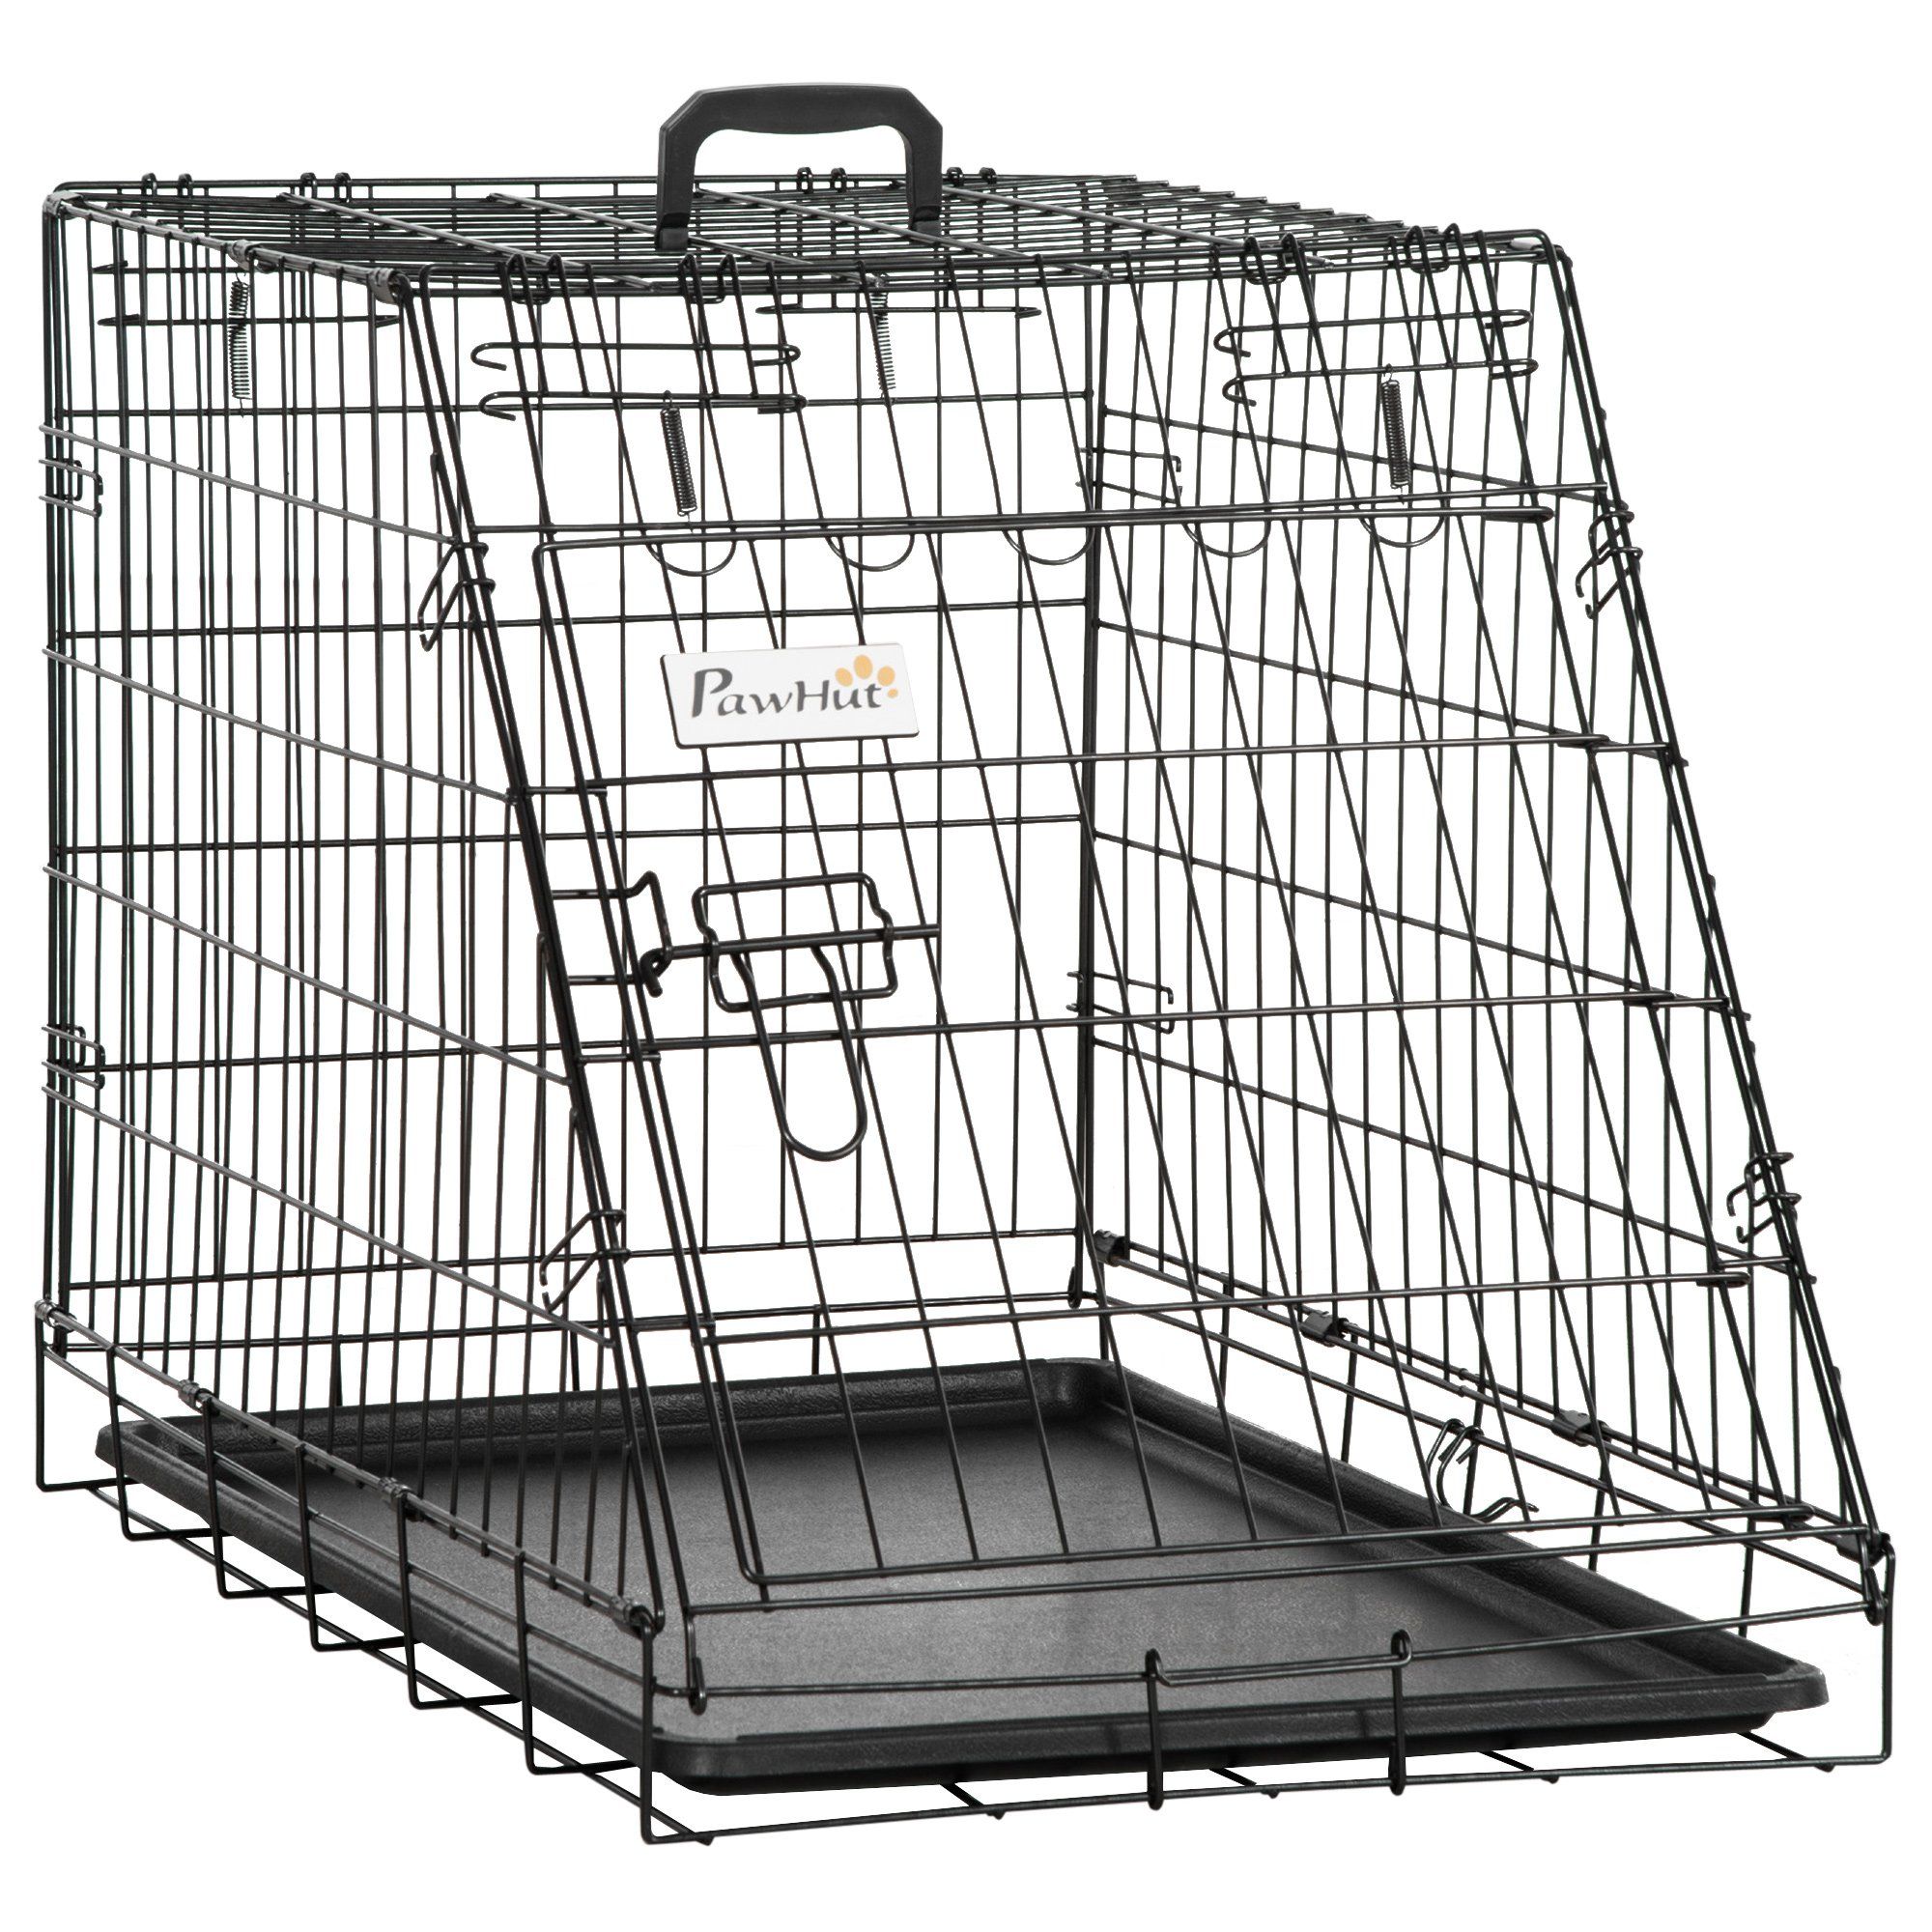 Pawhut Metal Collapsible Car Dog Cage Crate Transport Folding Box Carrier Handle Removable Tray 77 X 47 X 55cm